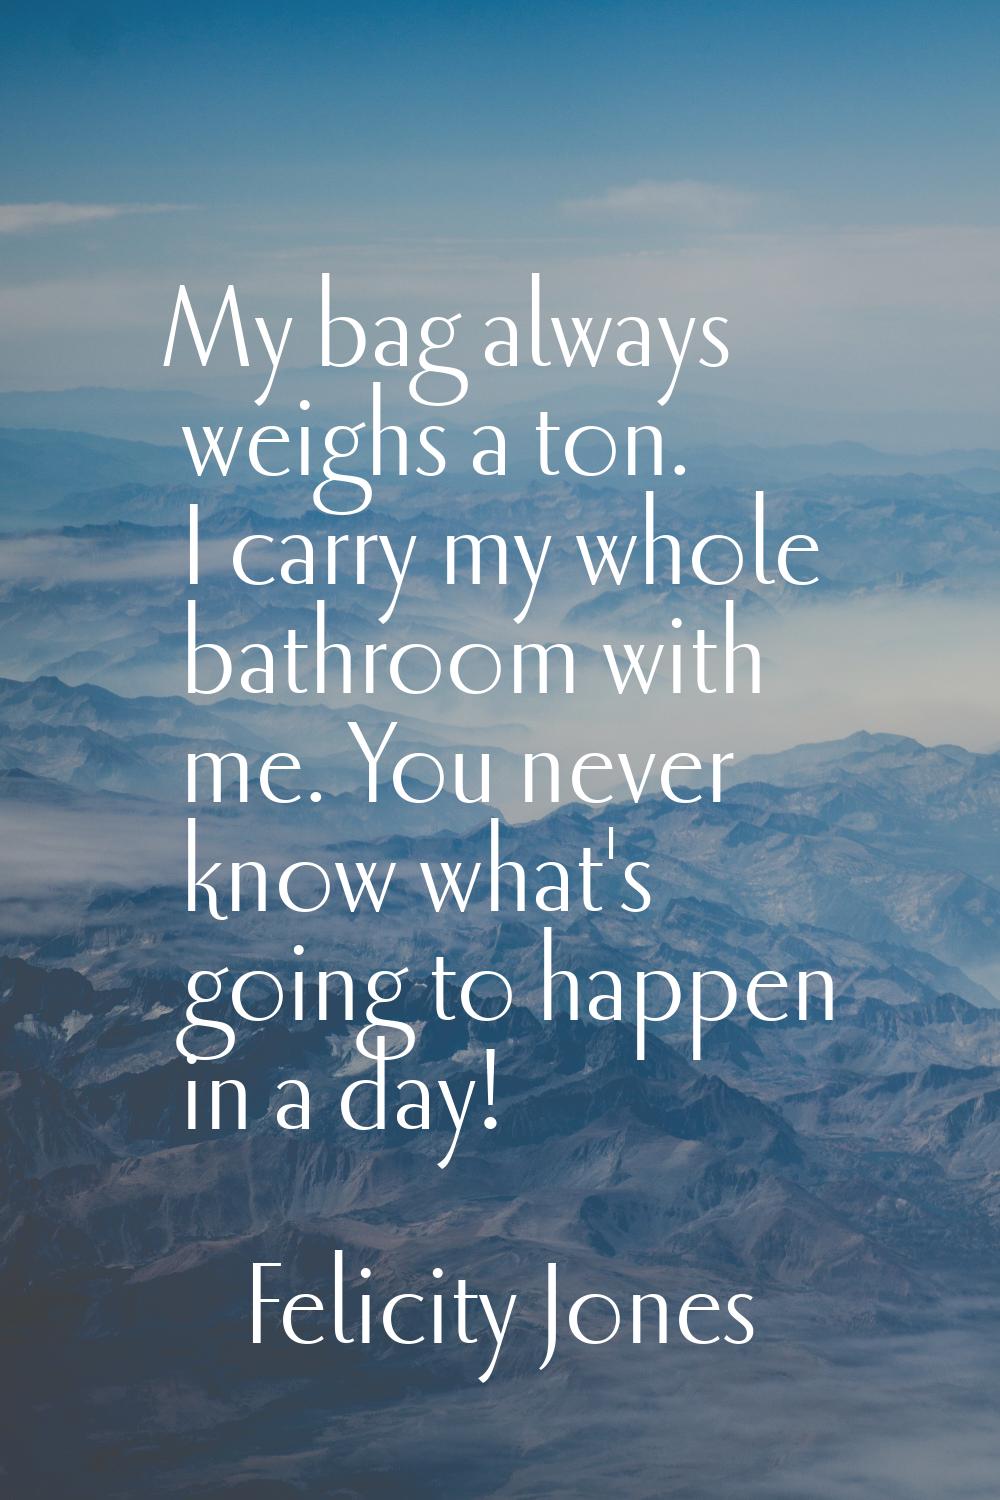 My bag always weighs a ton. I carry my whole bathroom with me. You never know what's going to happe